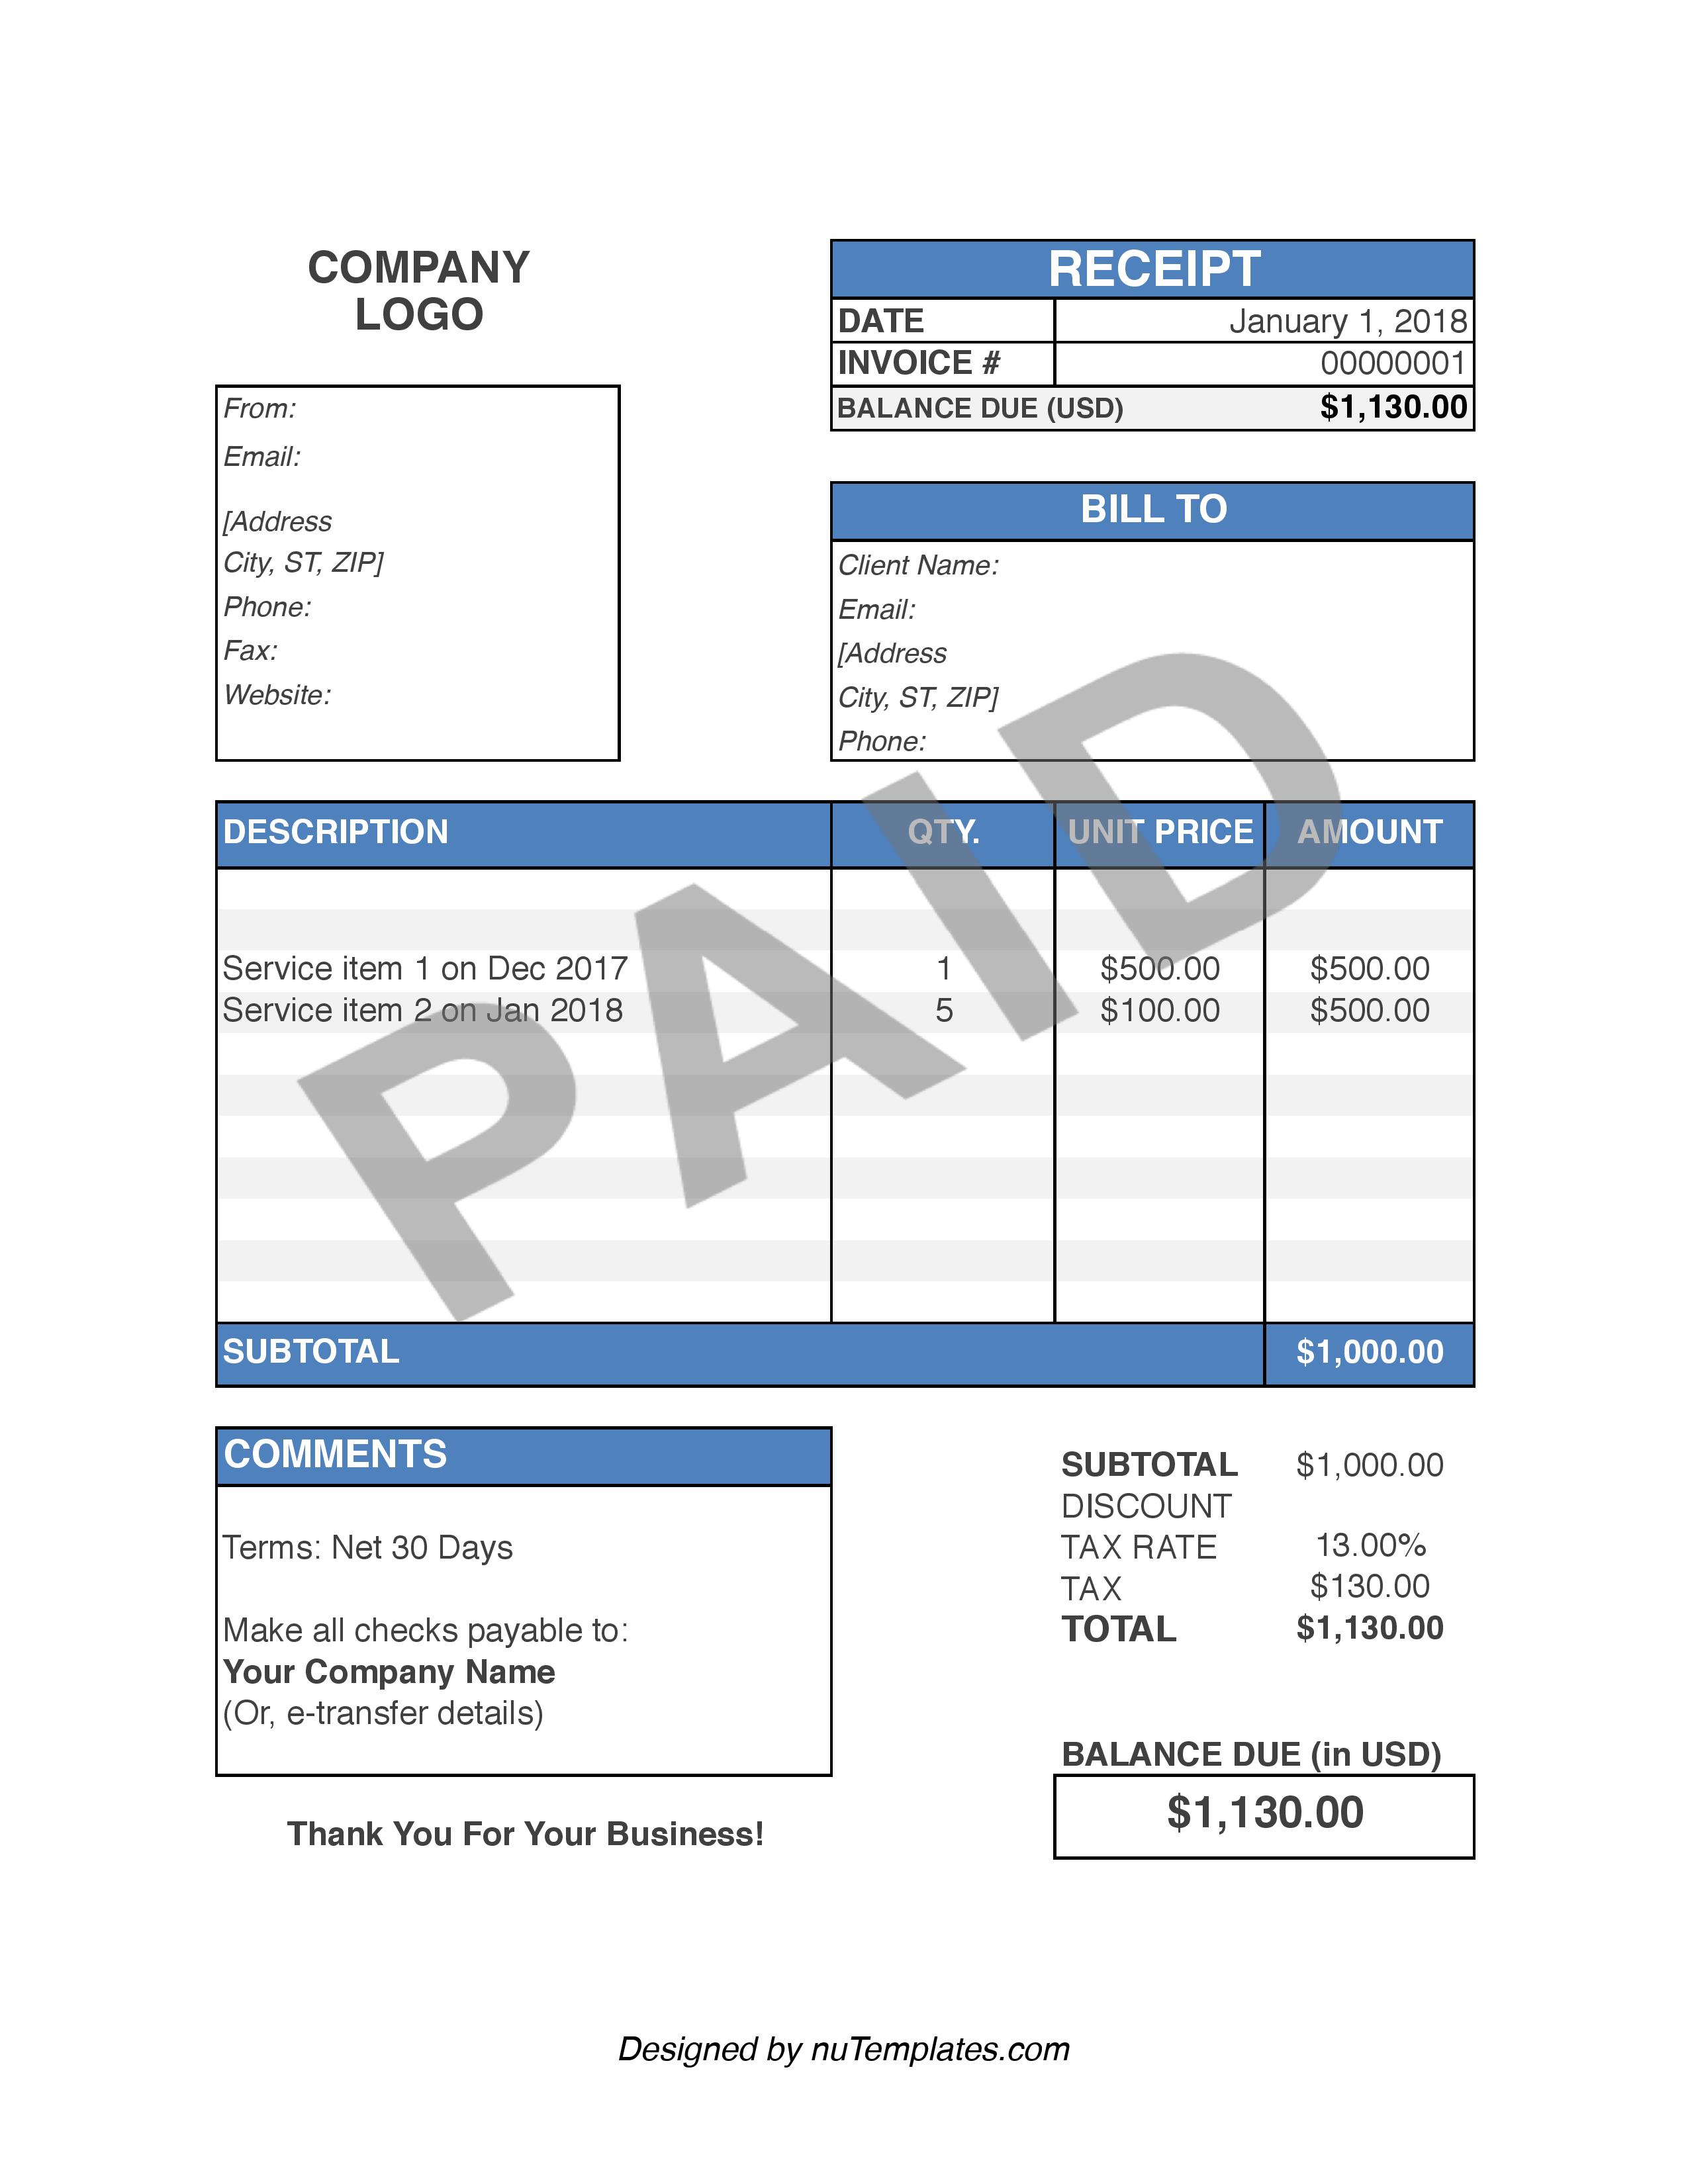 printable-service-receipt-form-printable-forms-free-online